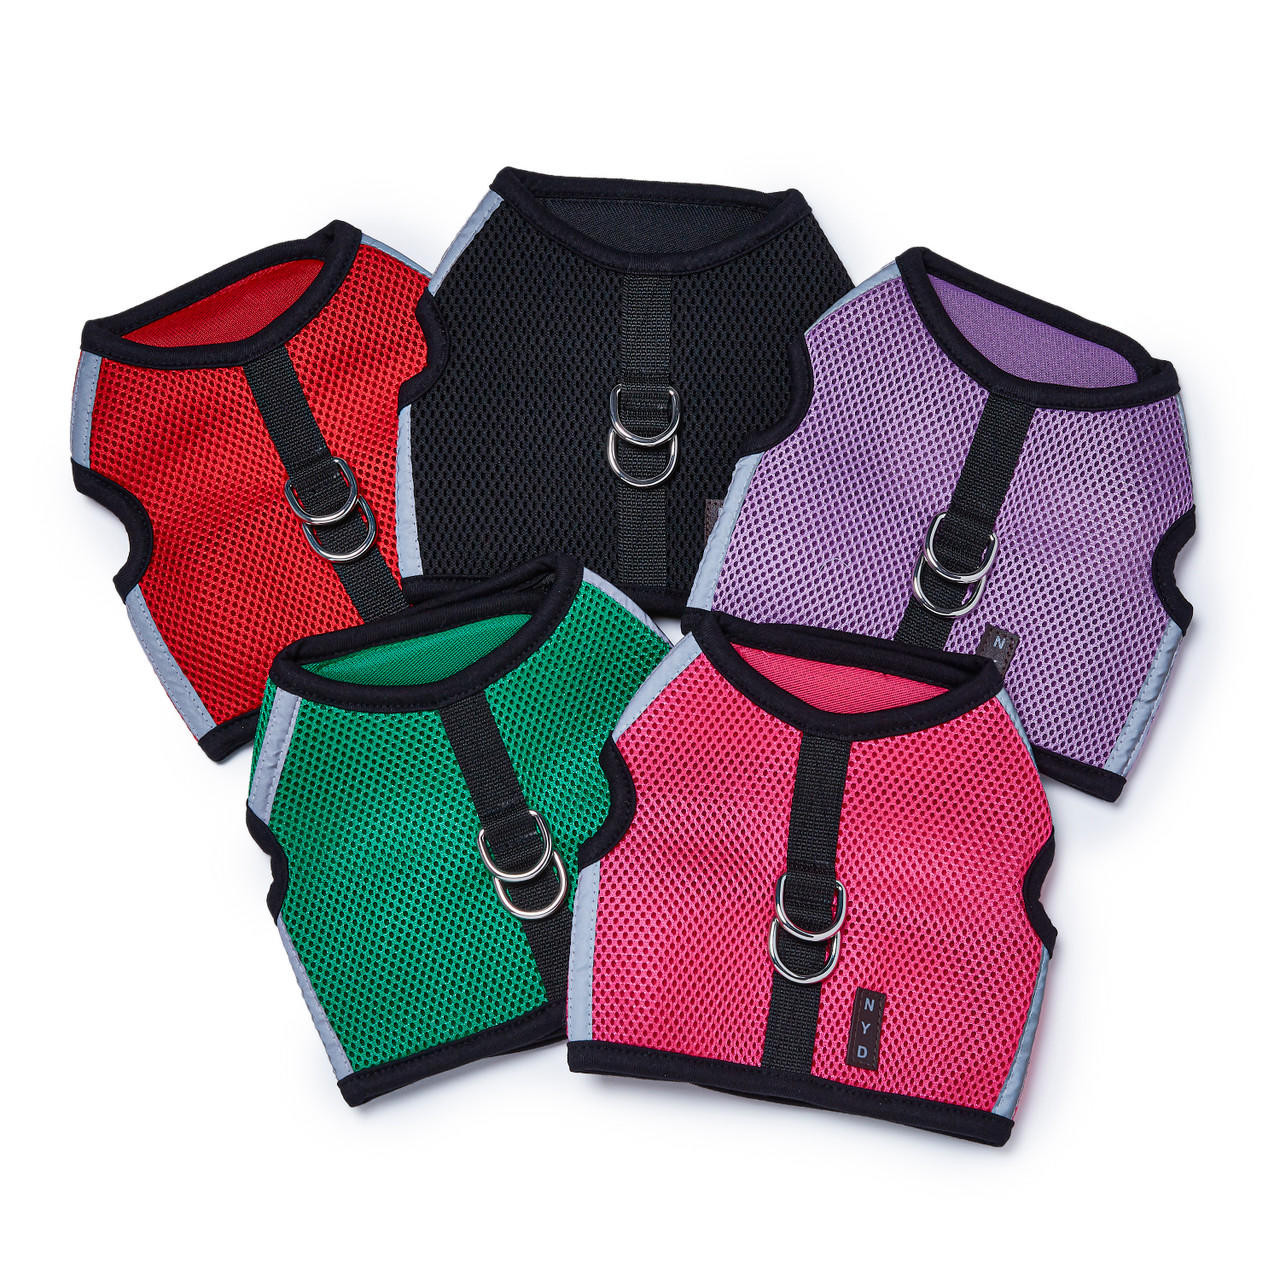  NYD Mesh Reflective No Buckle Harness 